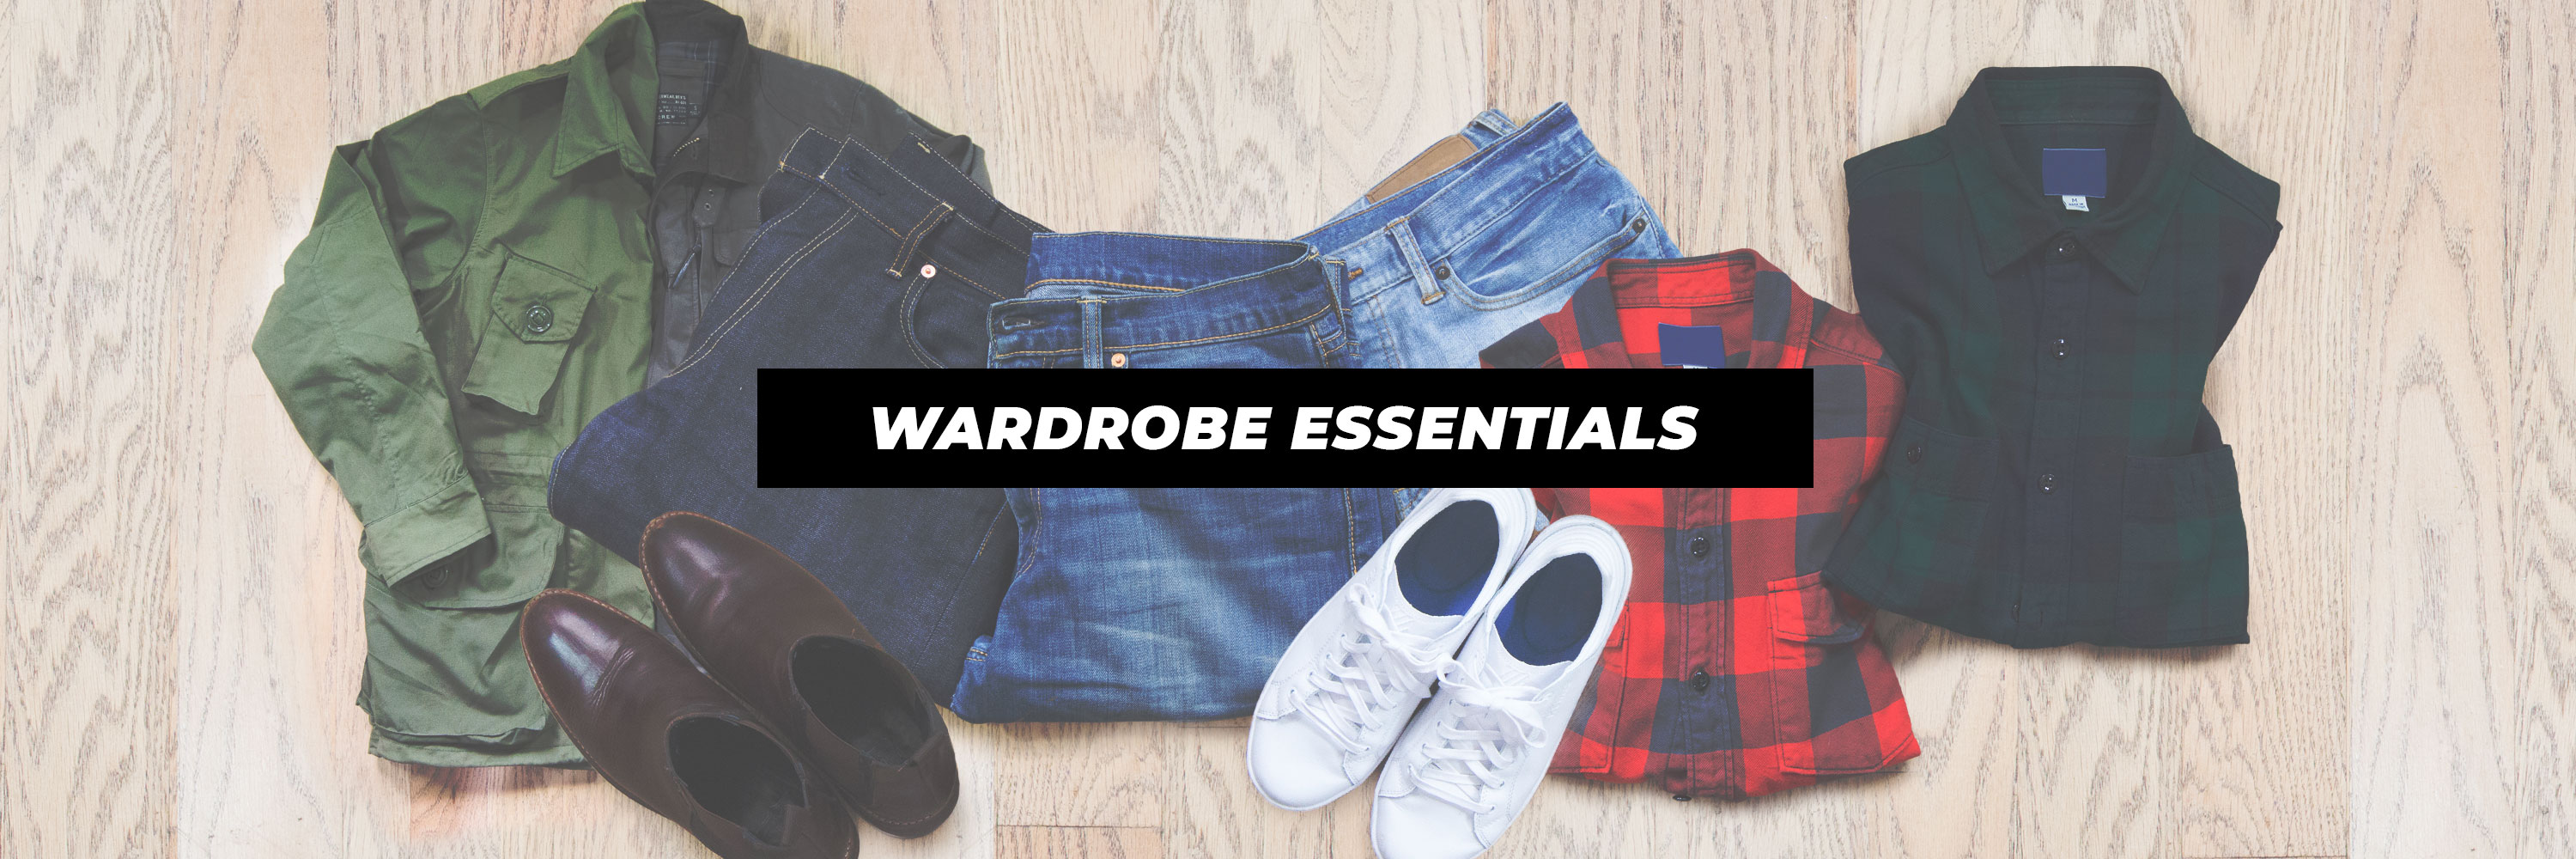 Men’s Wardrobe Essentials: All You Need For A Minimal and Versatile Wardrobe